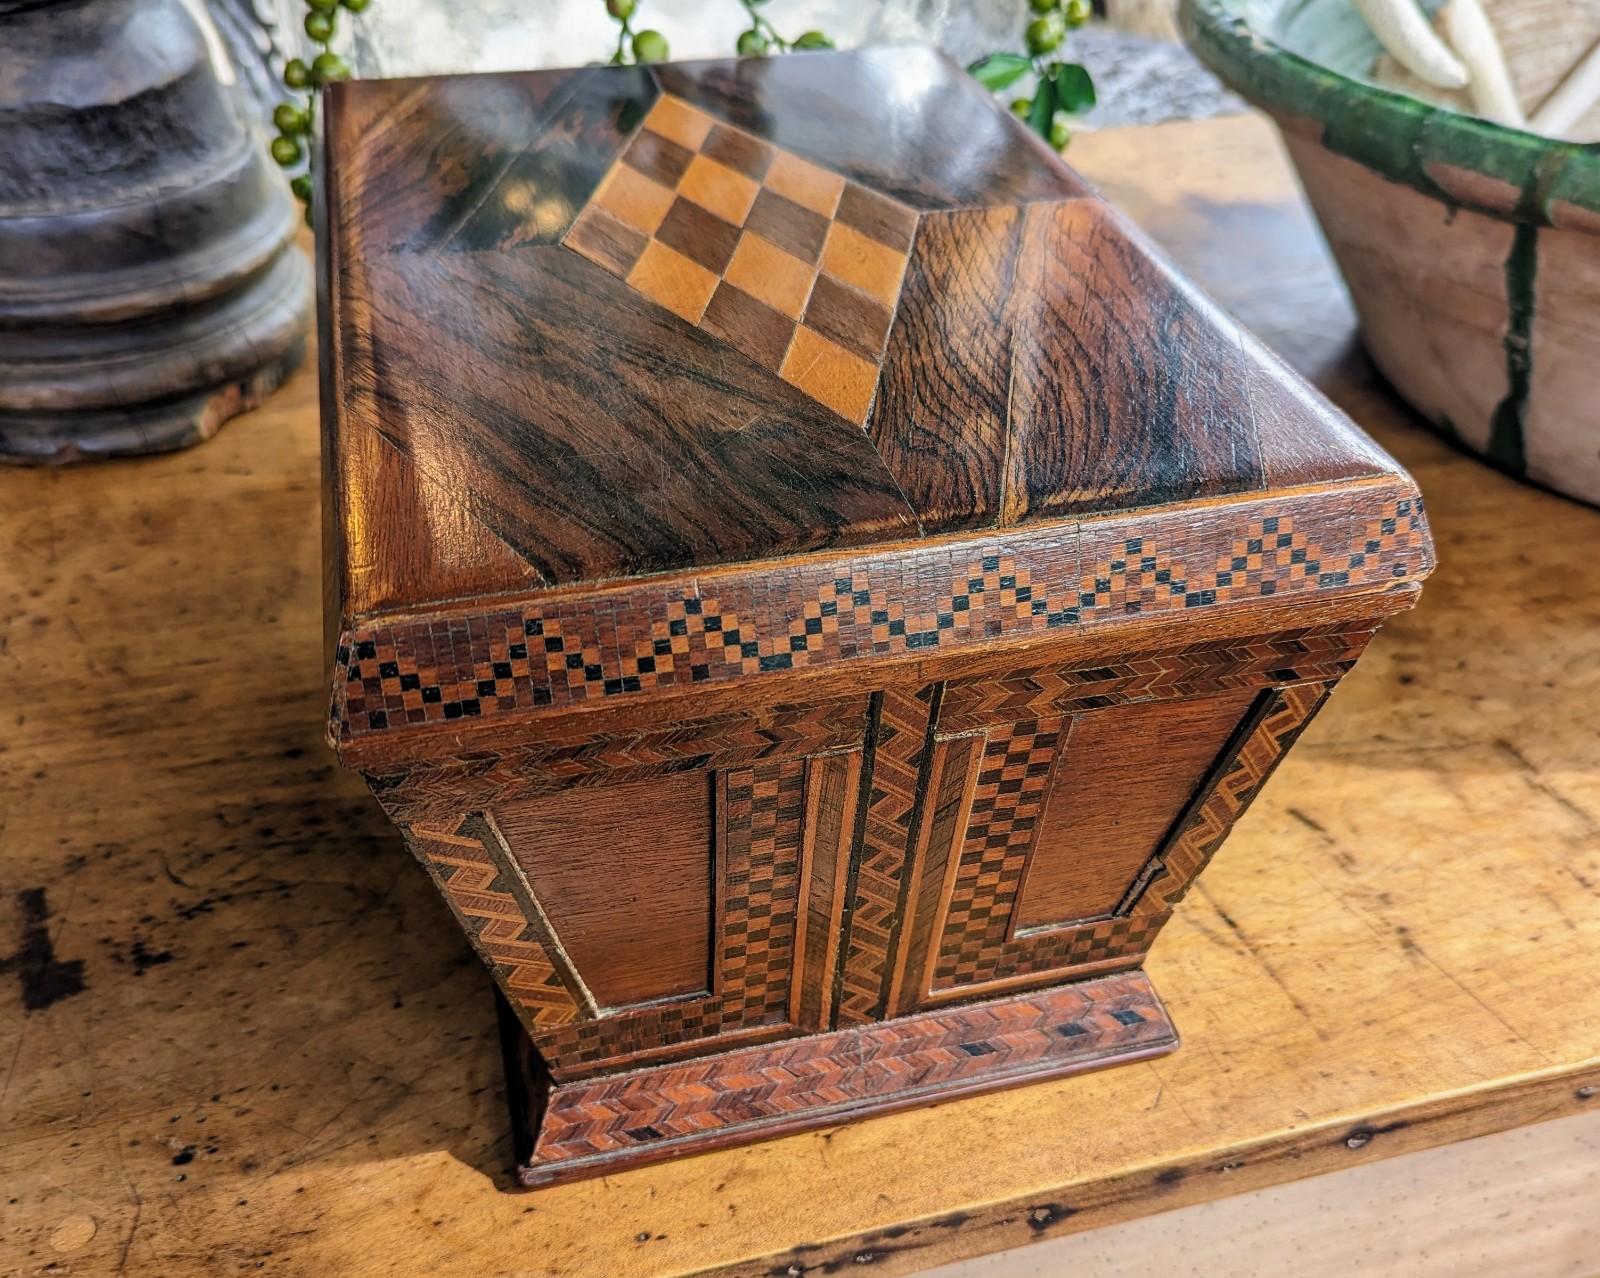 Antique Large Wood Marquetry Inlay Box with Decorative Checkered Design In Good Condition For Sale In Greer, SC